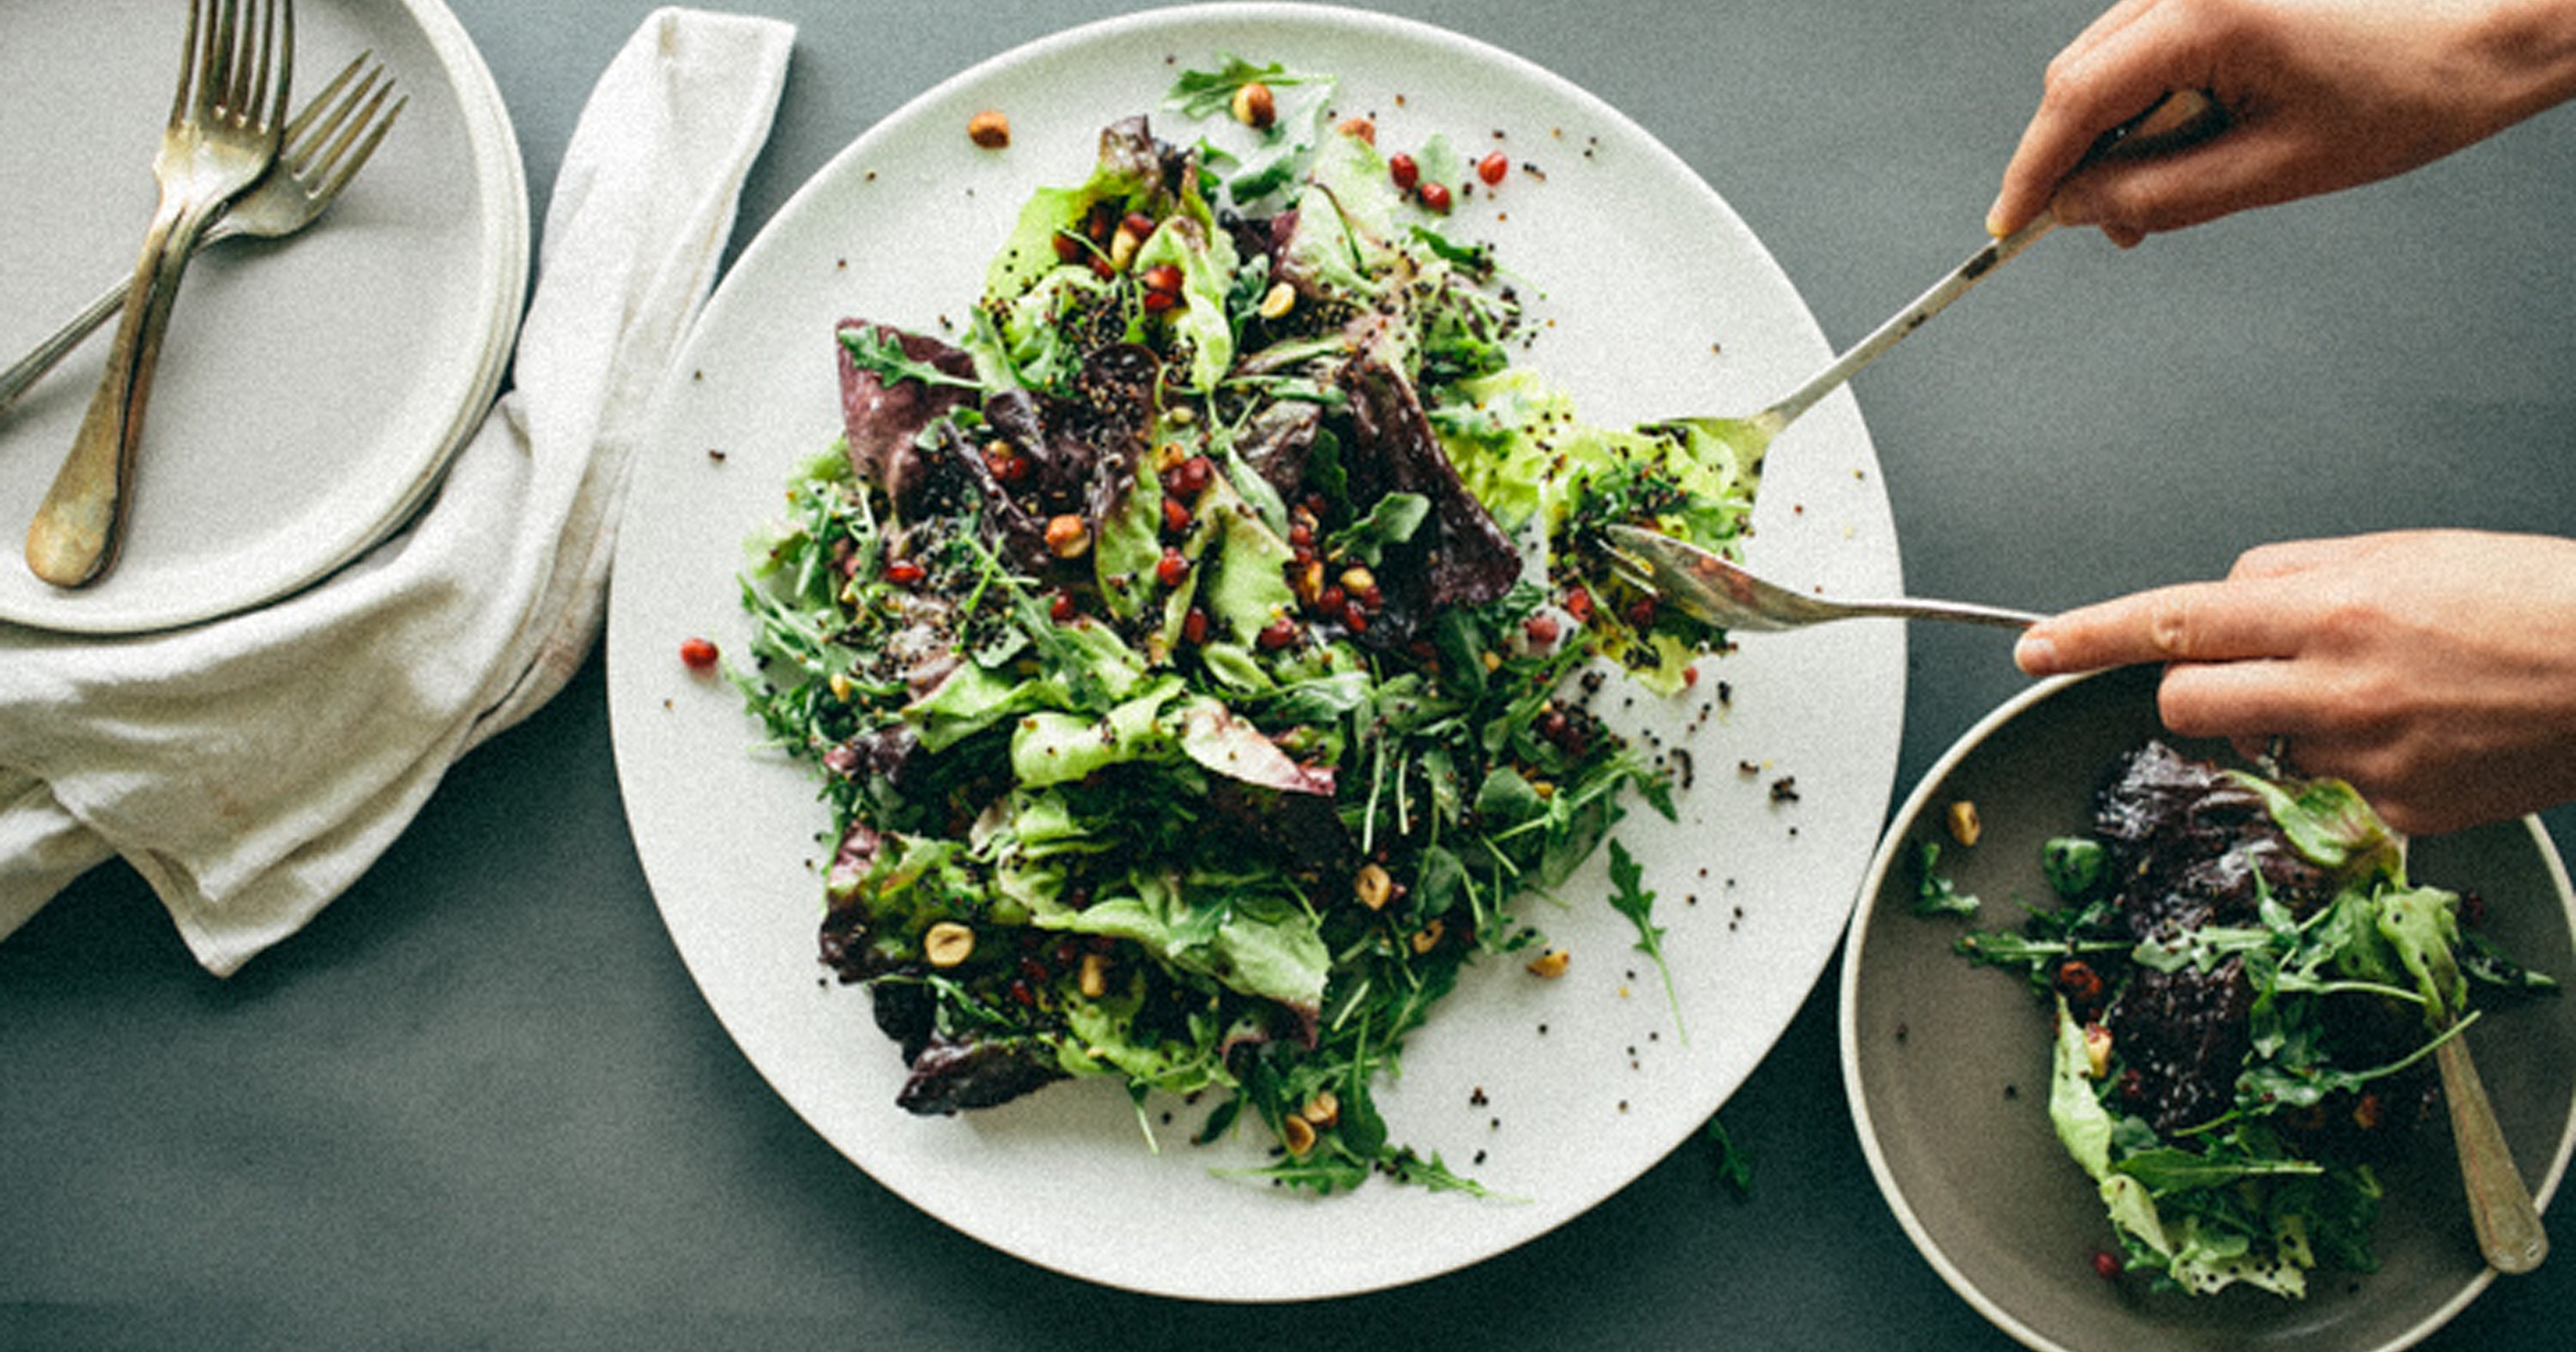 Get Your Life Right With These 7 Warming Winter Salads